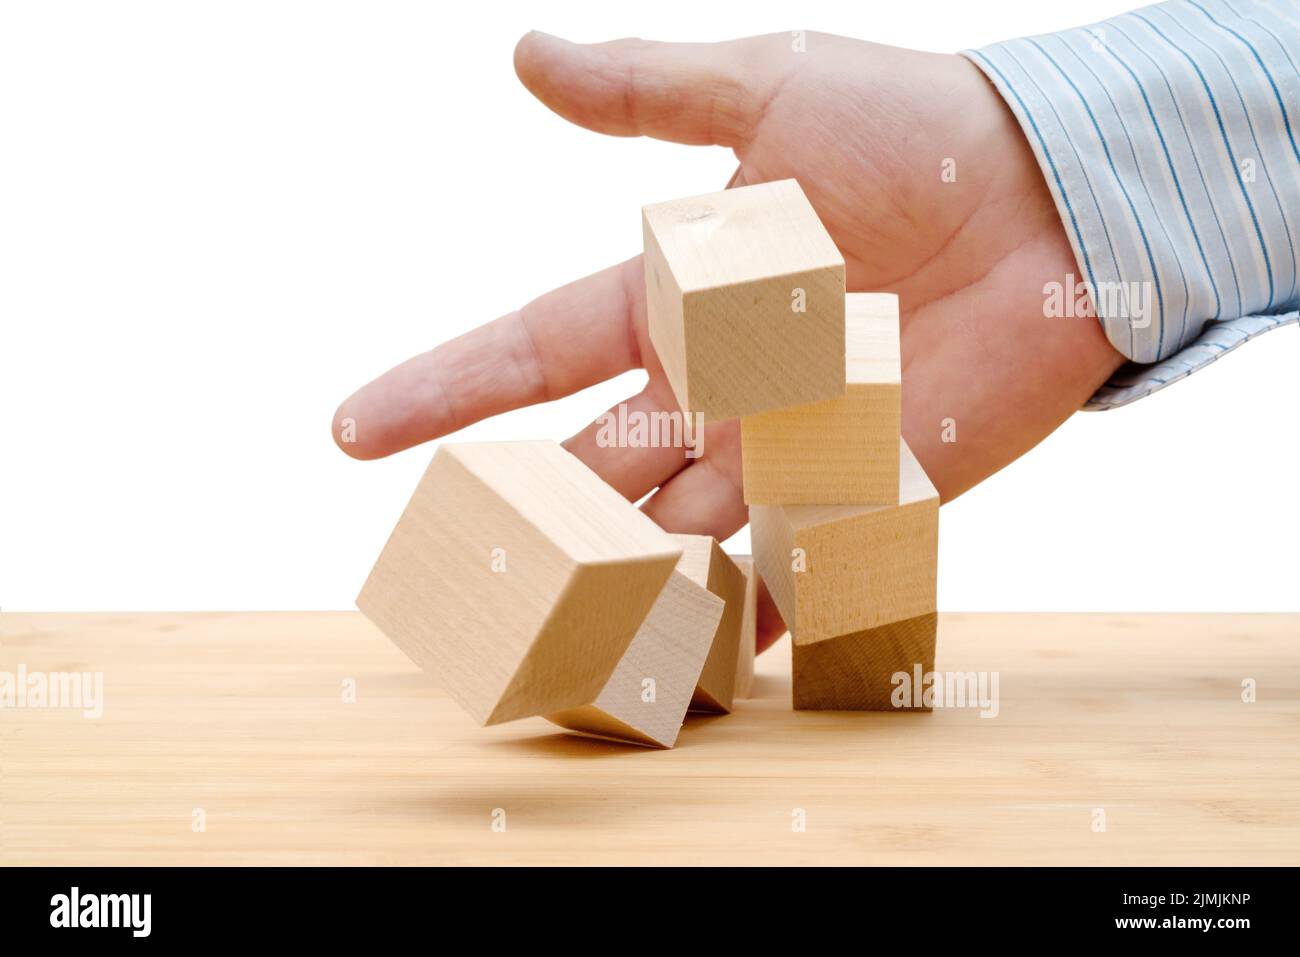 Destruction of the house. Loss of housing, home insurance. Accident, natural disaster. Stock Photo